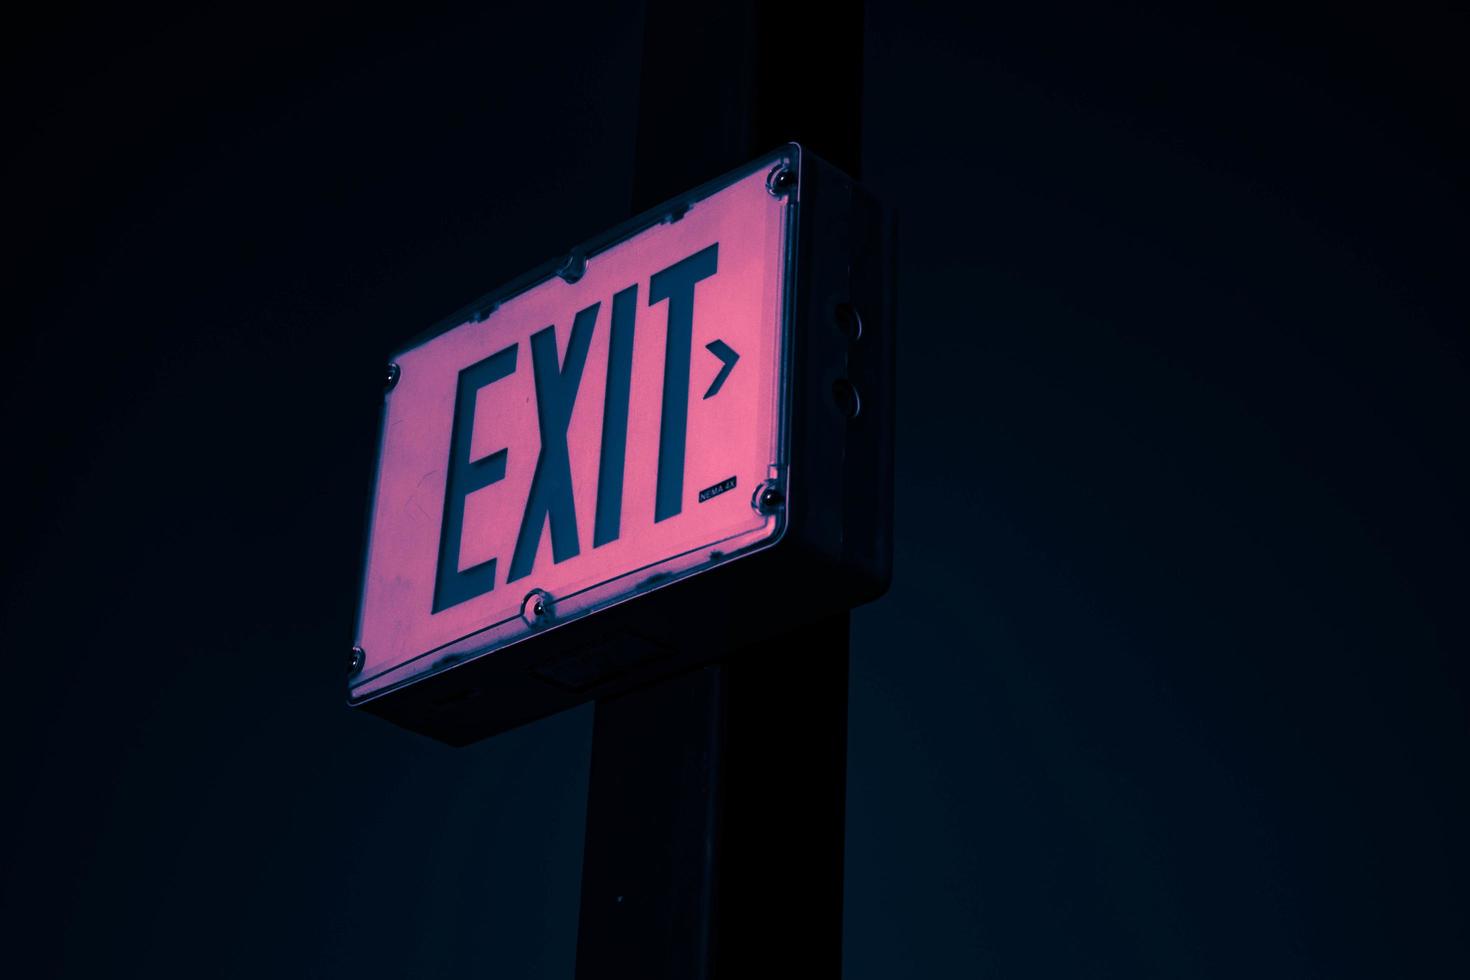 An exit sign at night reflecting pink tones photo